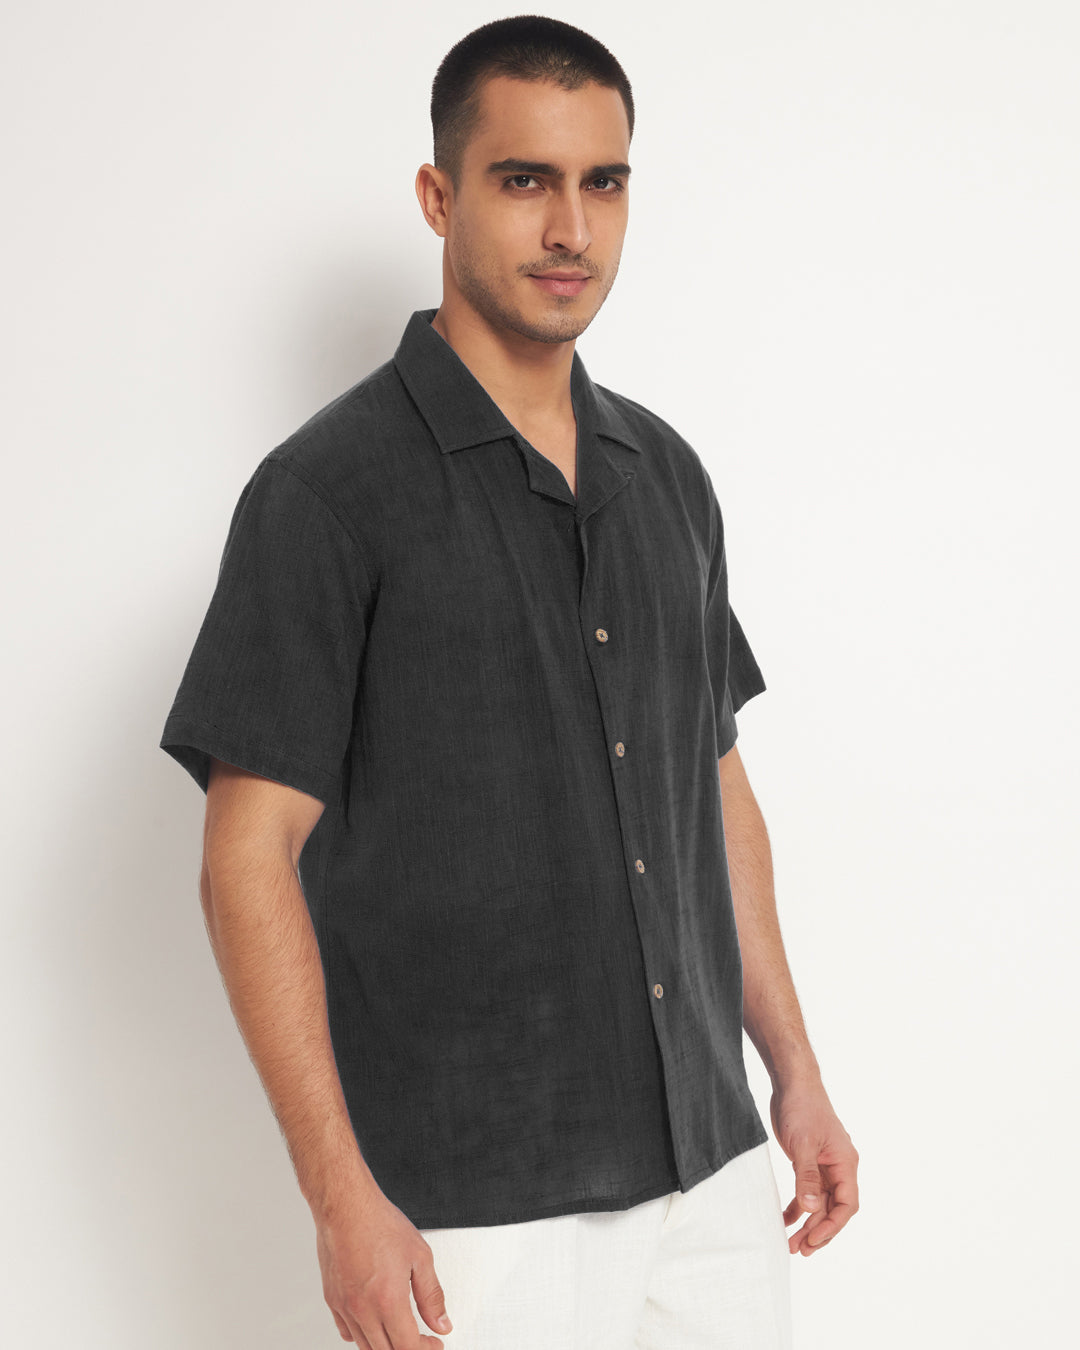 Luxe Formal Cream Solid Shirt - York